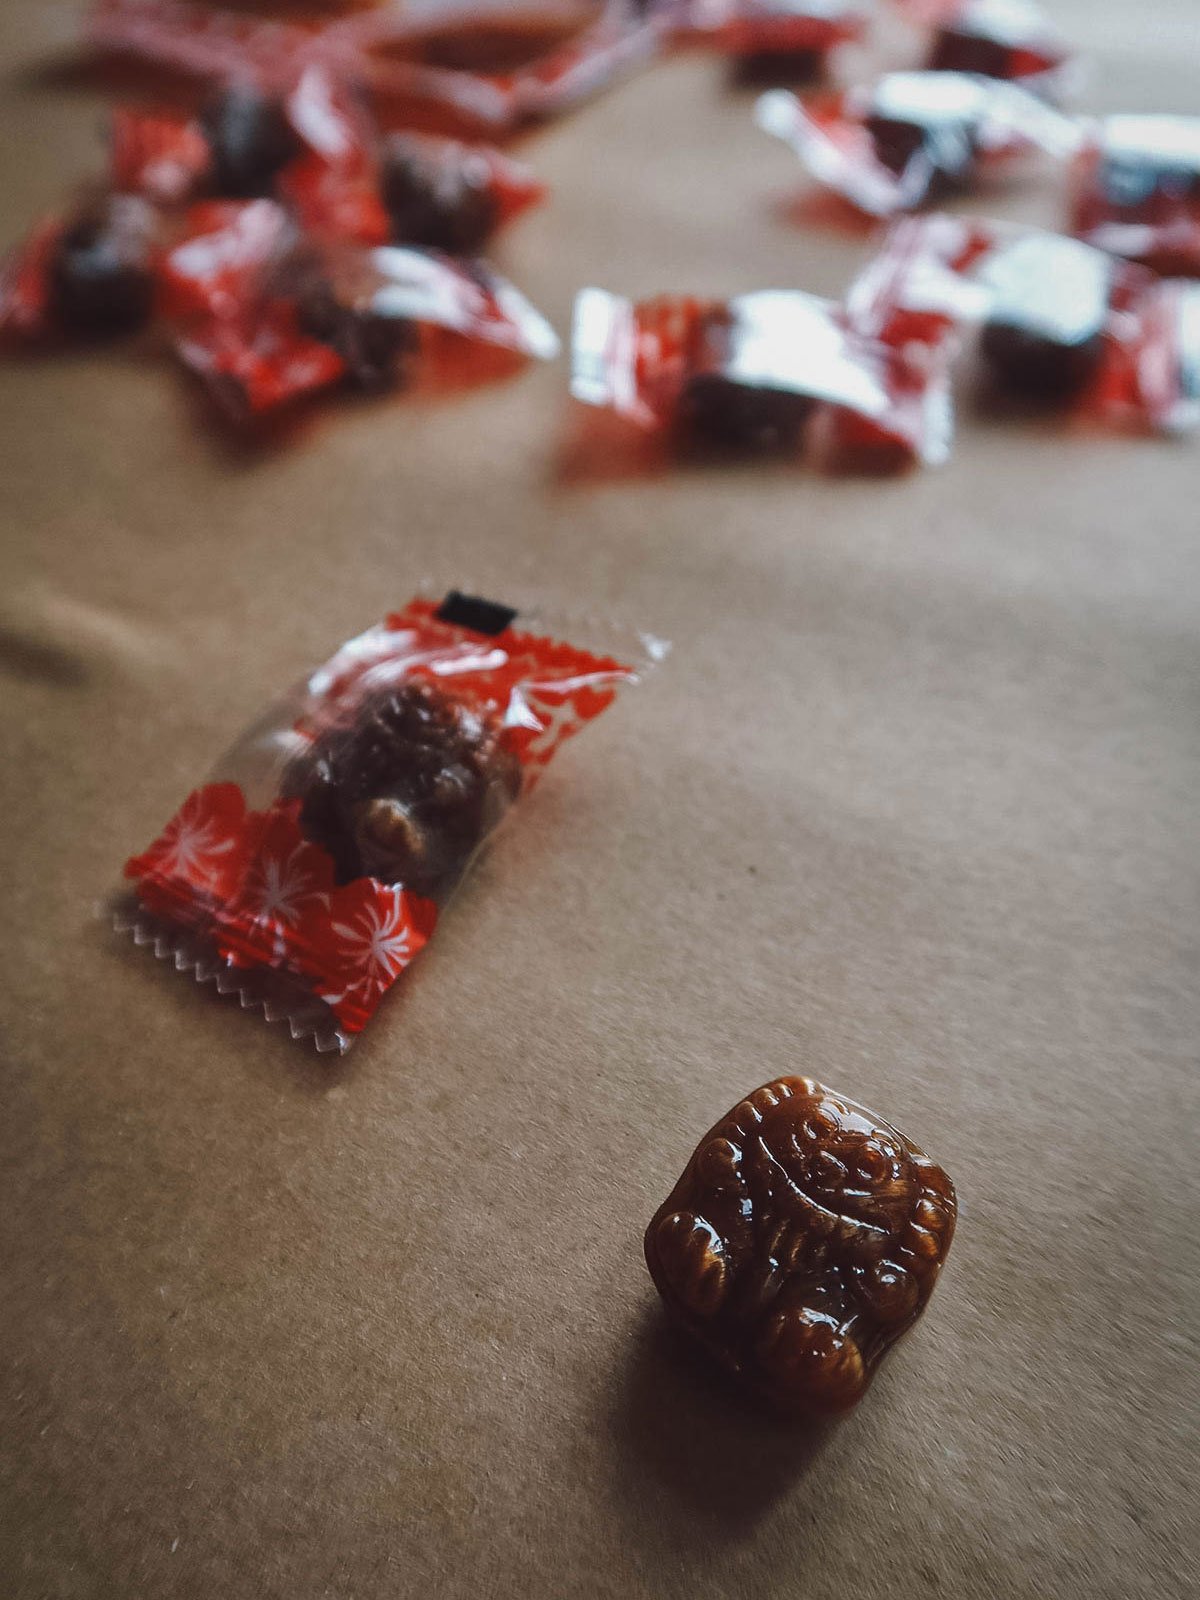 Brown sugar shisa candies on a table